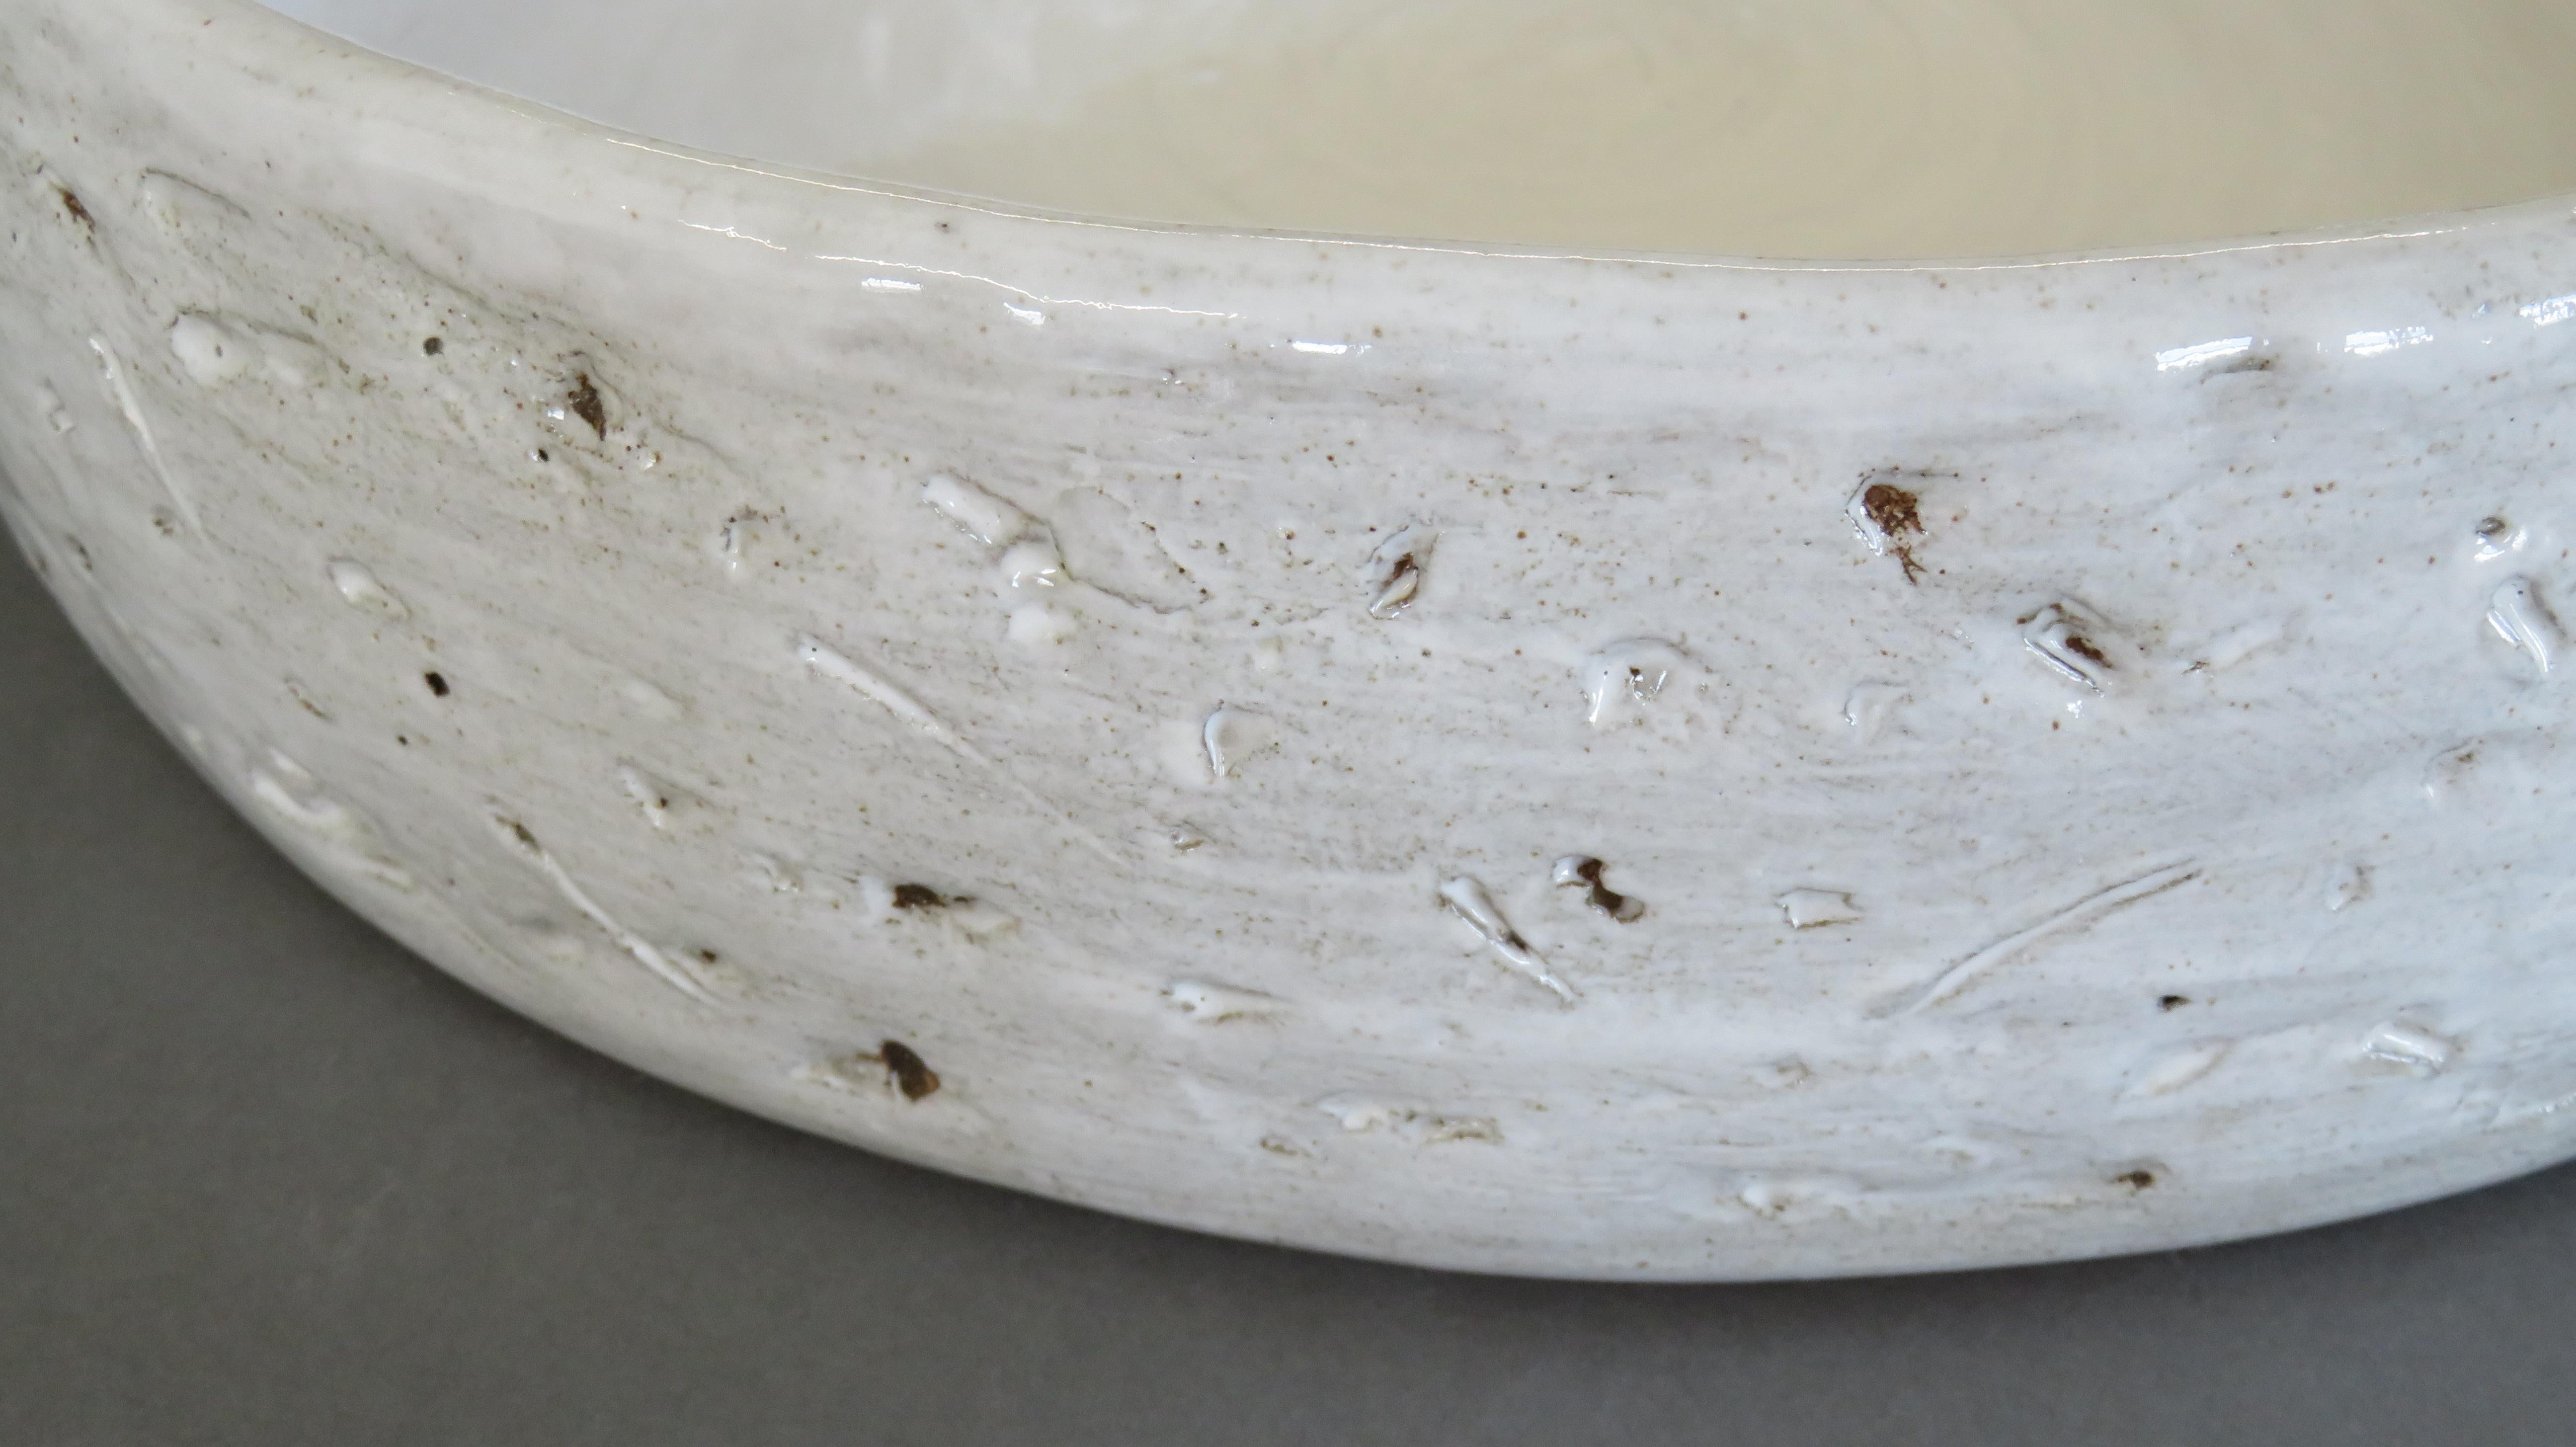 Large, wide and low ceramic stoneware serving bowl.  13.75 inches in diameter.
Subtle hand carved markings on the exterior with rich creamy white glaze.  Underglaze on the bottom reveals variations in the clay and unique firing marks.  Fully